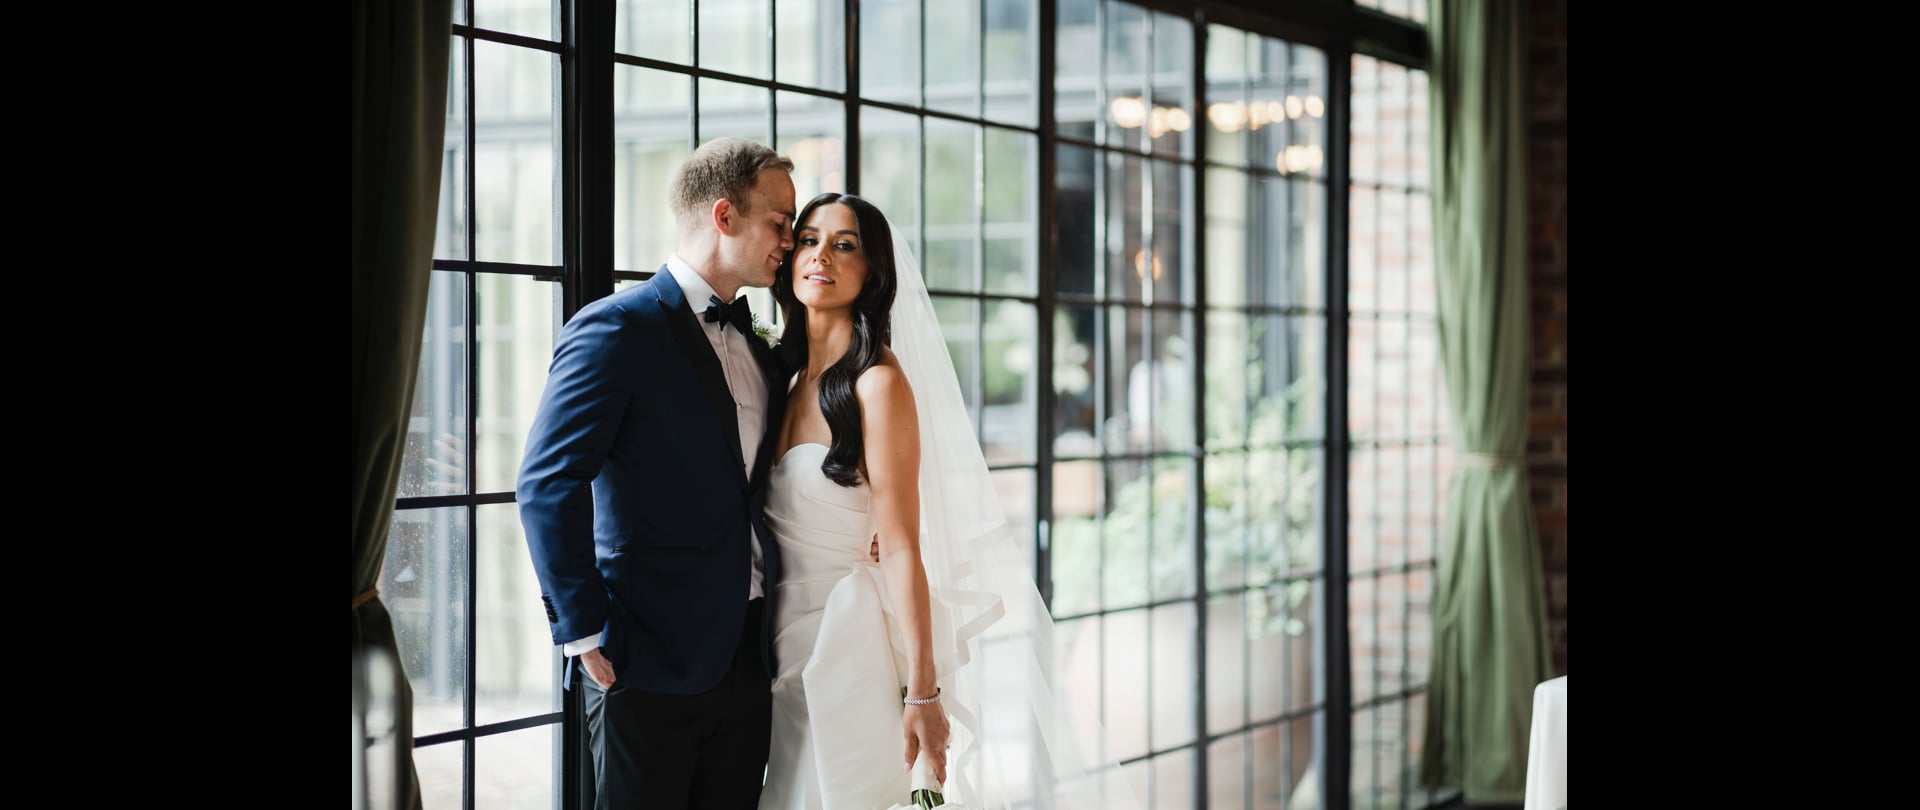 Alexis & Danny Wedding Video Filmed at New York, United States